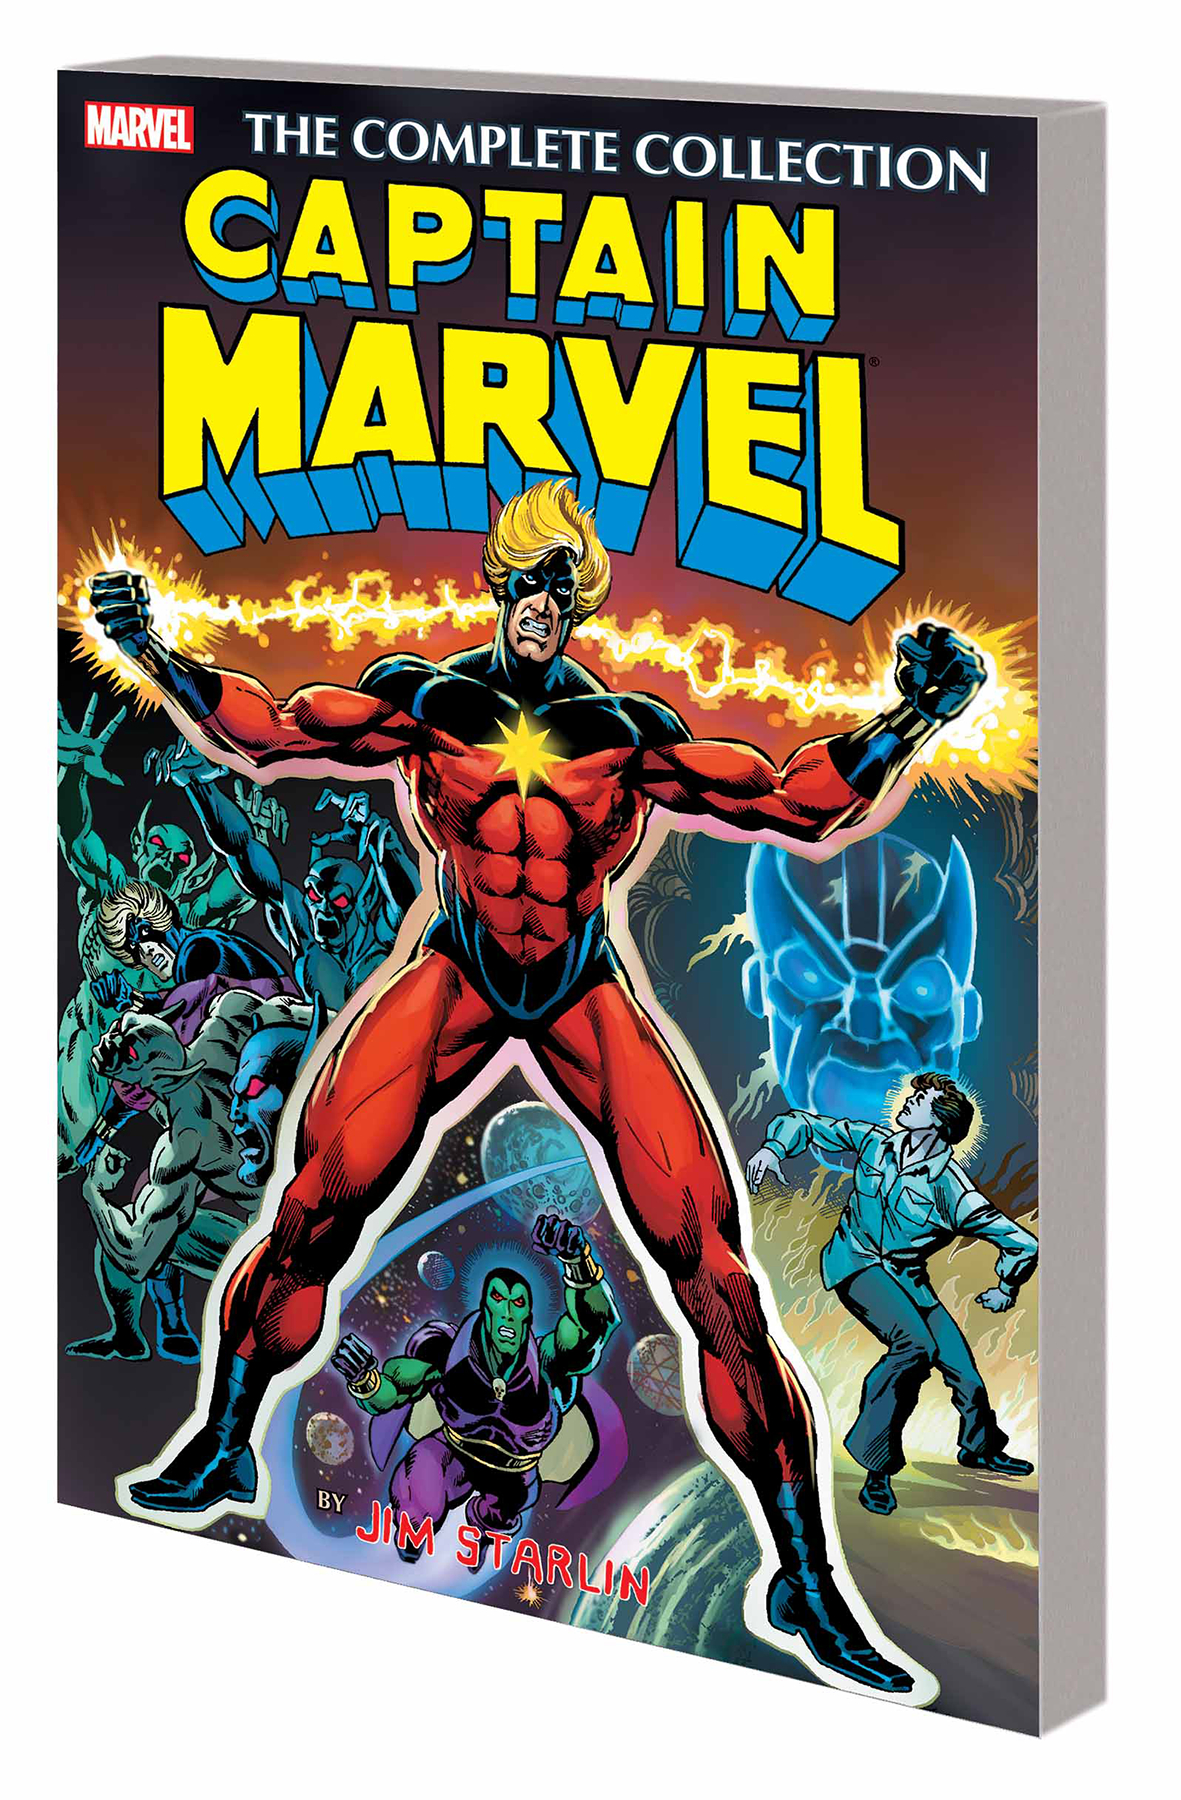 CAPTAIN MARVEL BY JIM STARLIN TP COMPLETE COLLECTION